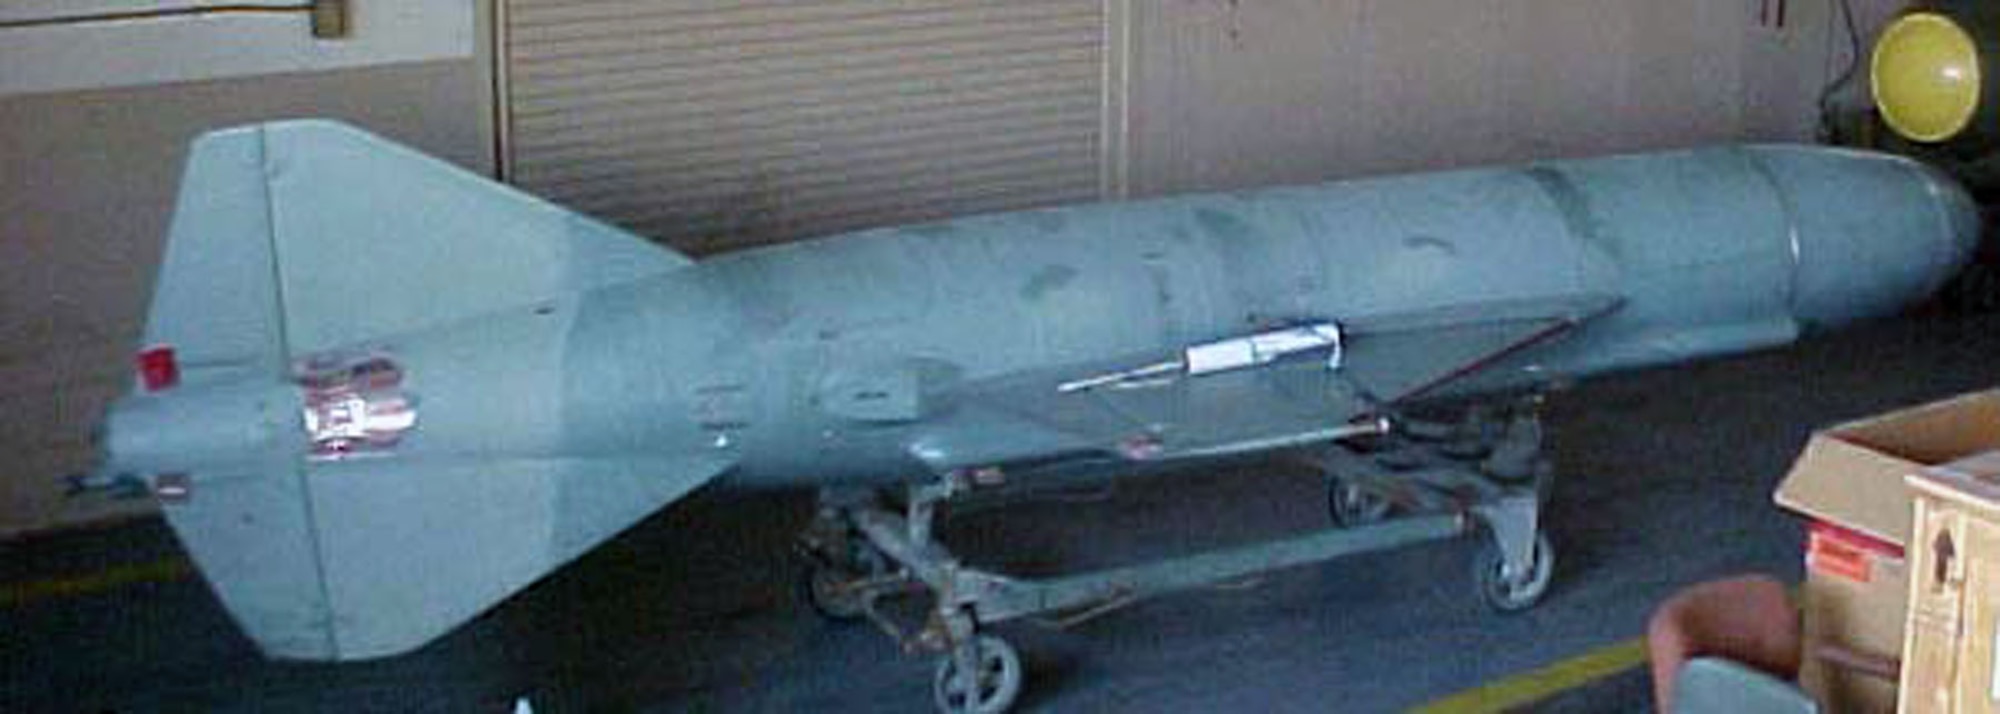 The Russian SS-N-2 missile was used by Egypt in 1968 against Israel, by India in 1971 against Pakistan, and by Iran during its 1980-1988 war with Iraq. (U.S. Air Force photo)